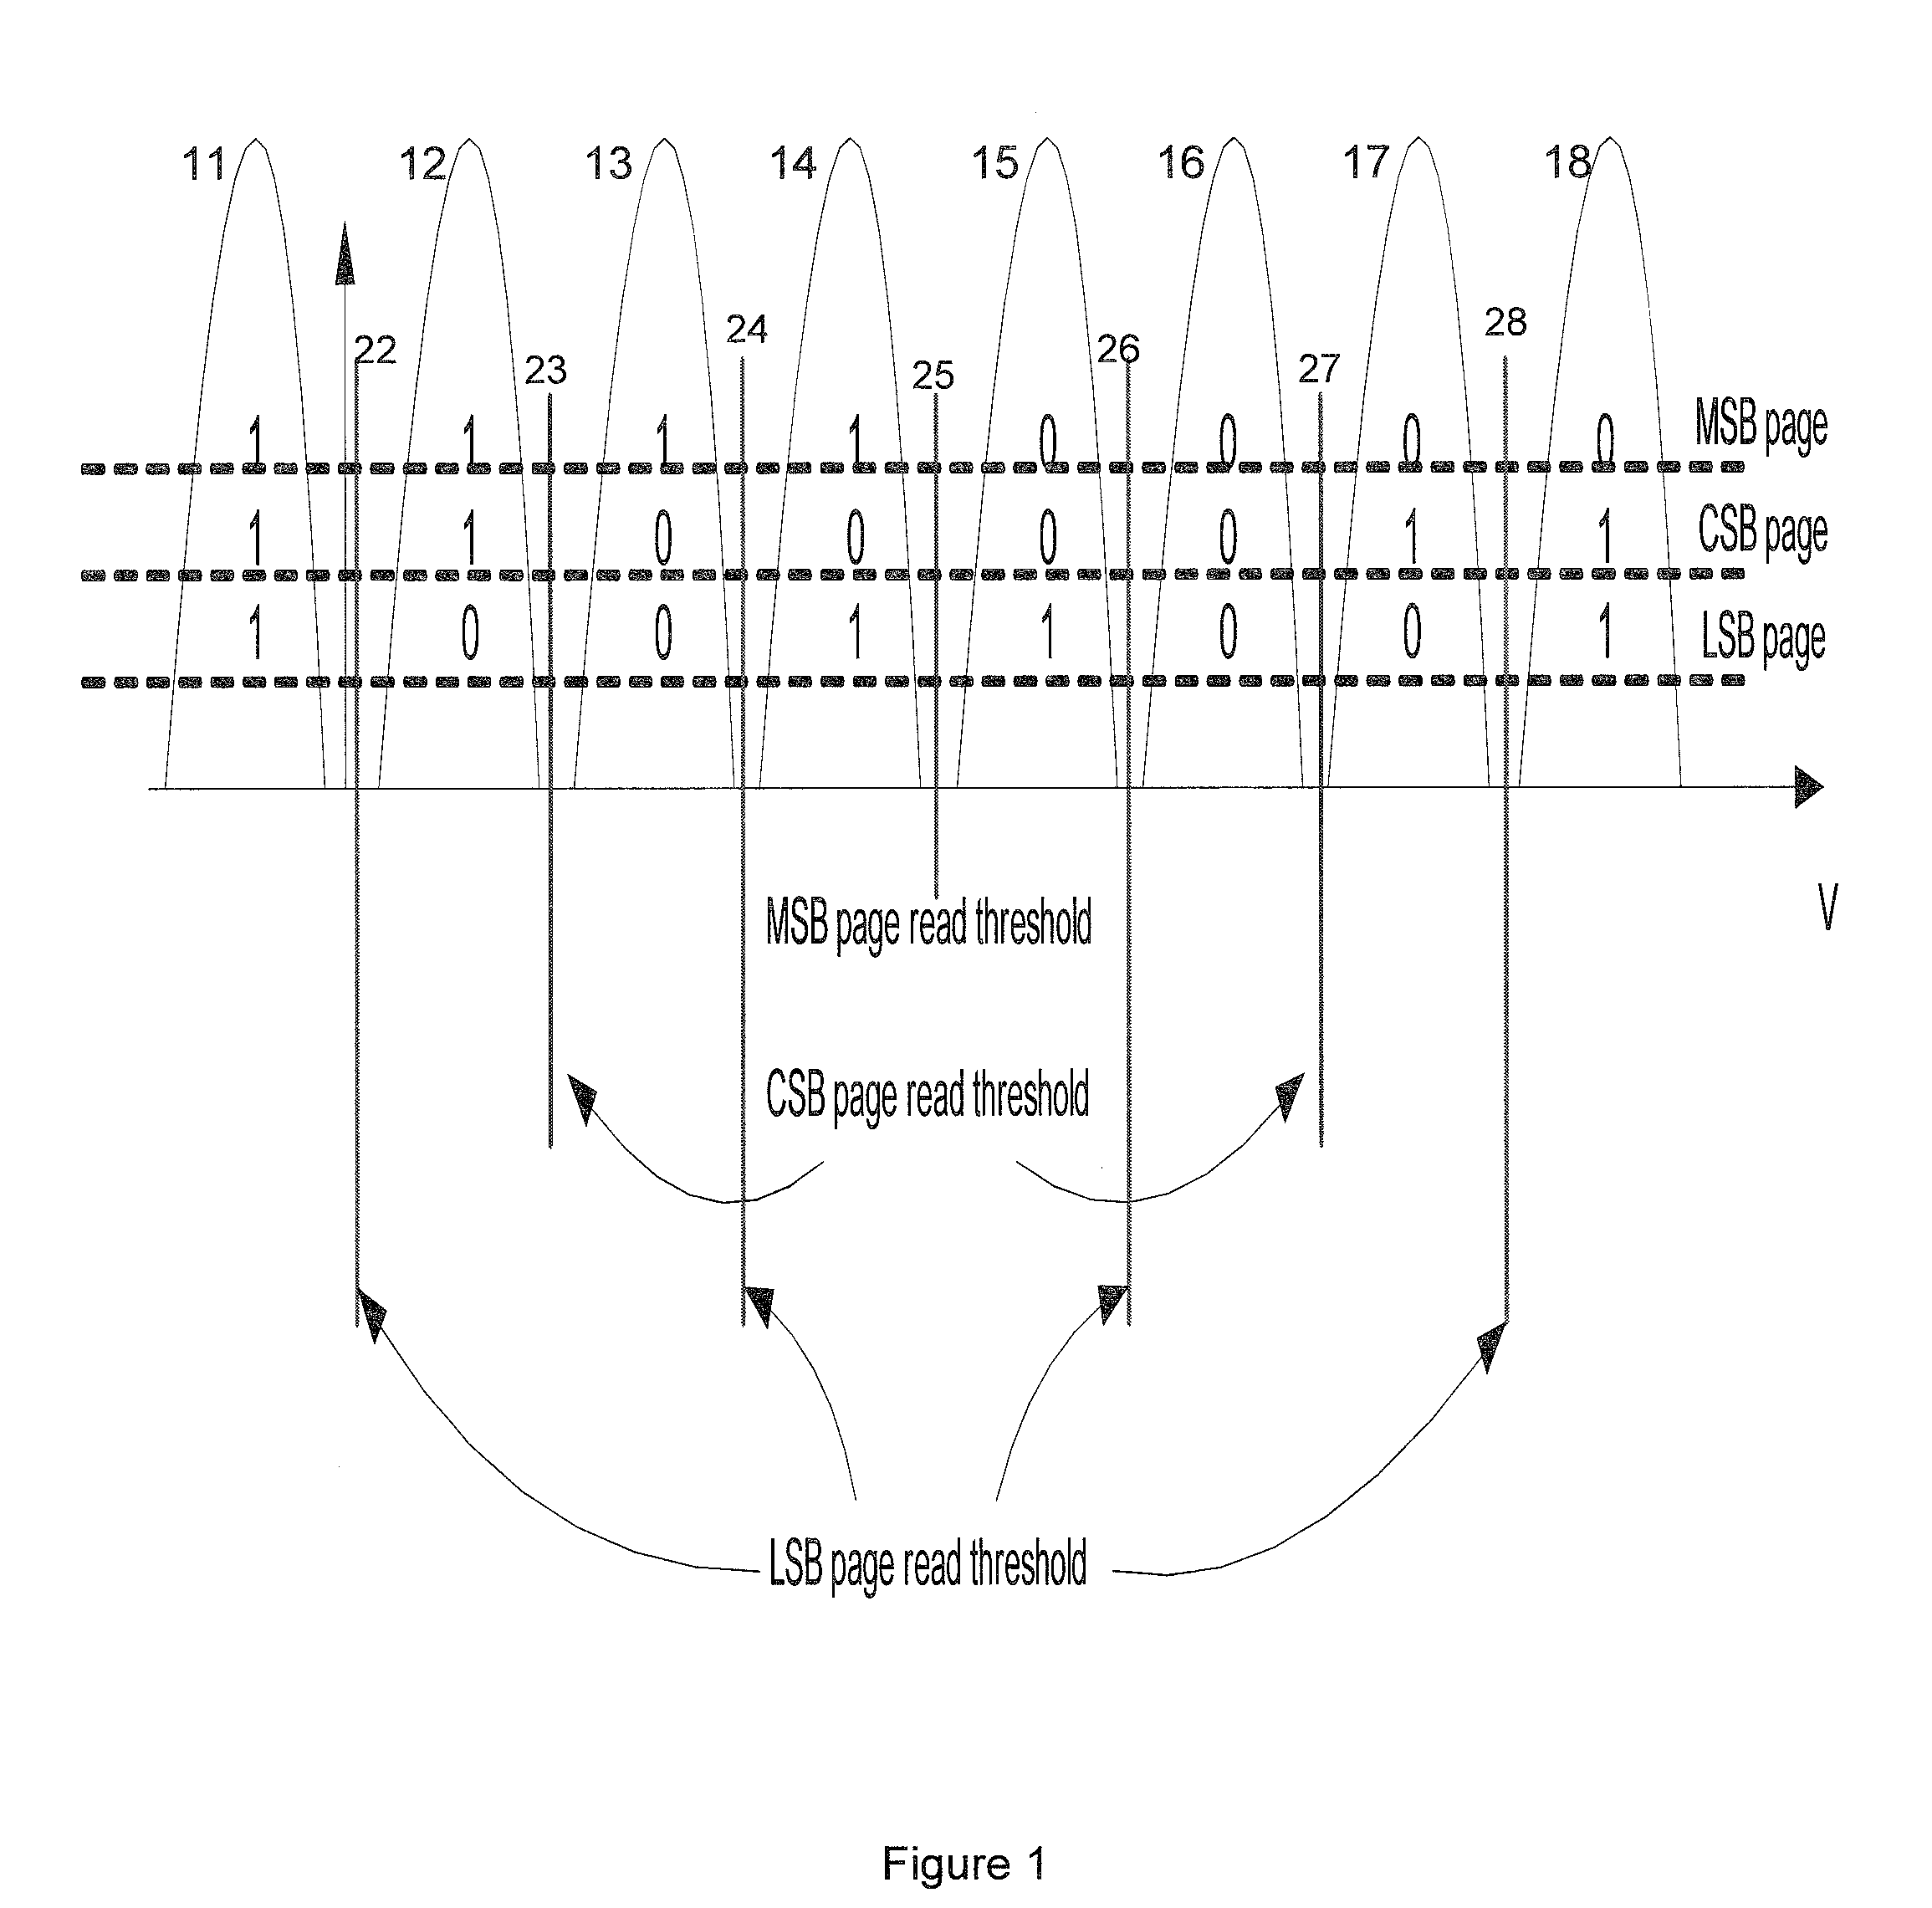 Systems and methods for pre-equalization and code design for a flash memory